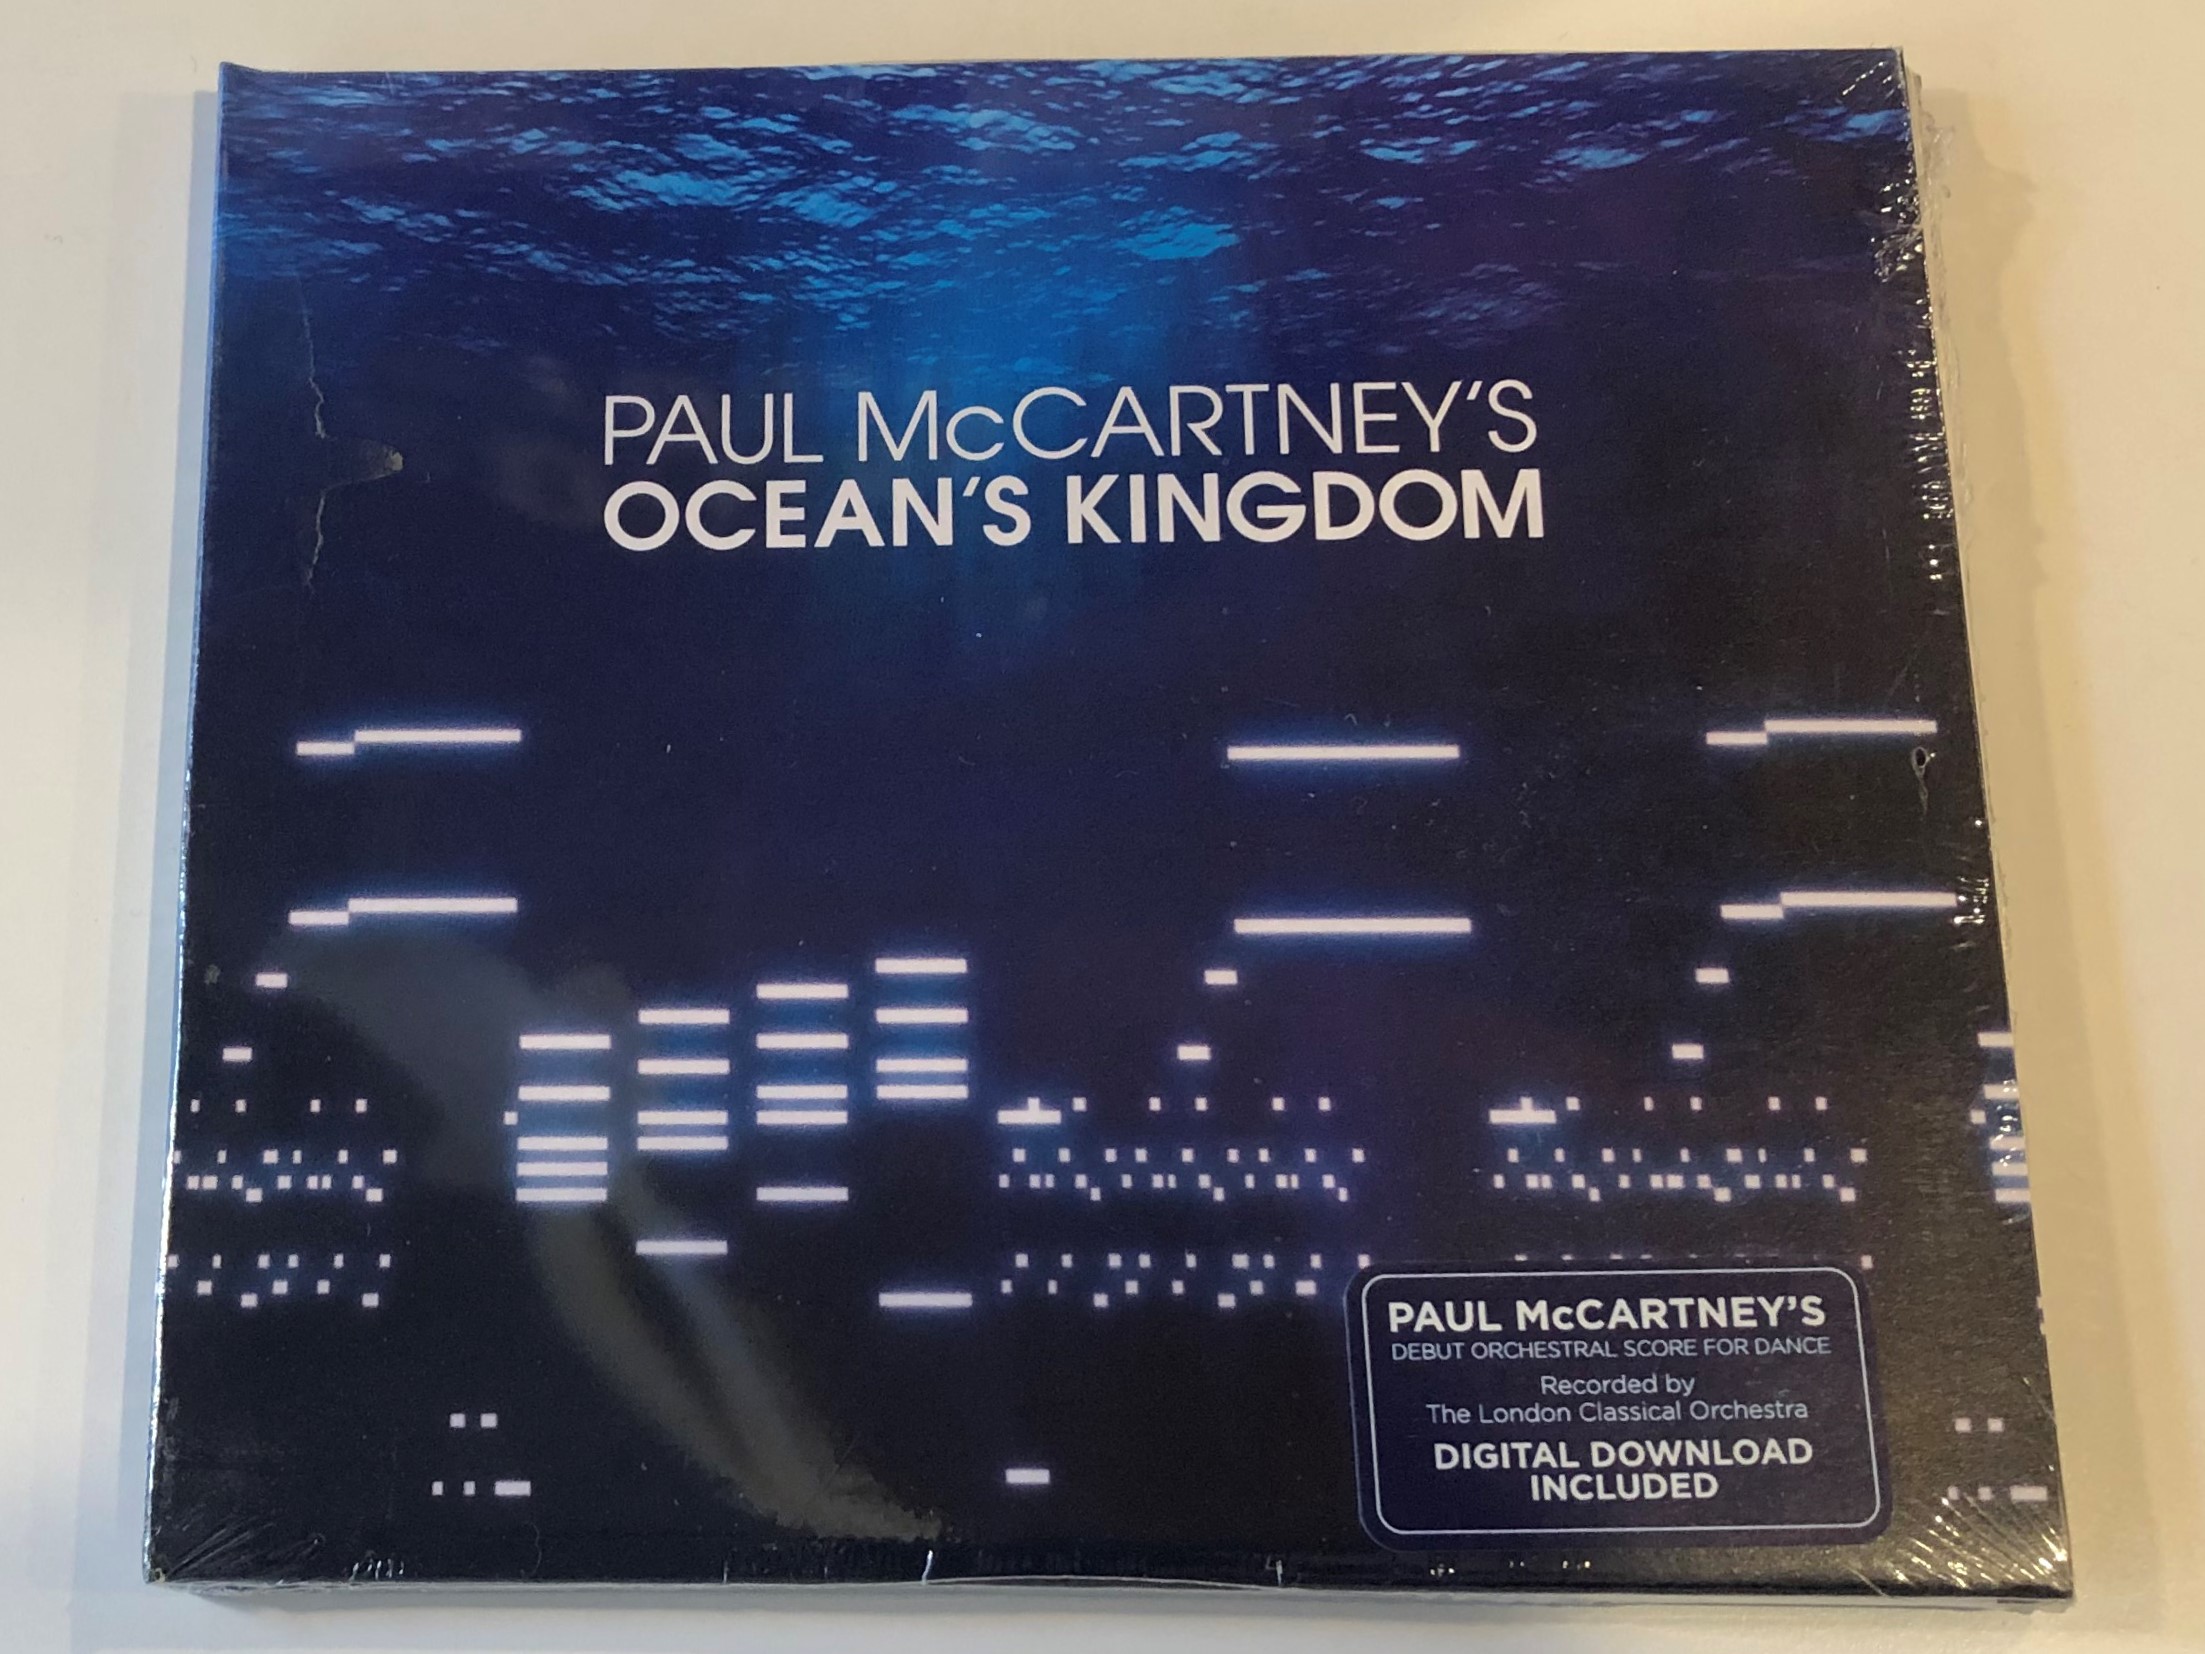 paul-mccartney-s-ocean-s-kingdom-recorded-by-the-london-classical-orchestra-hear-music-audio-cd-2011-hrm-33250-02-1-.jpg